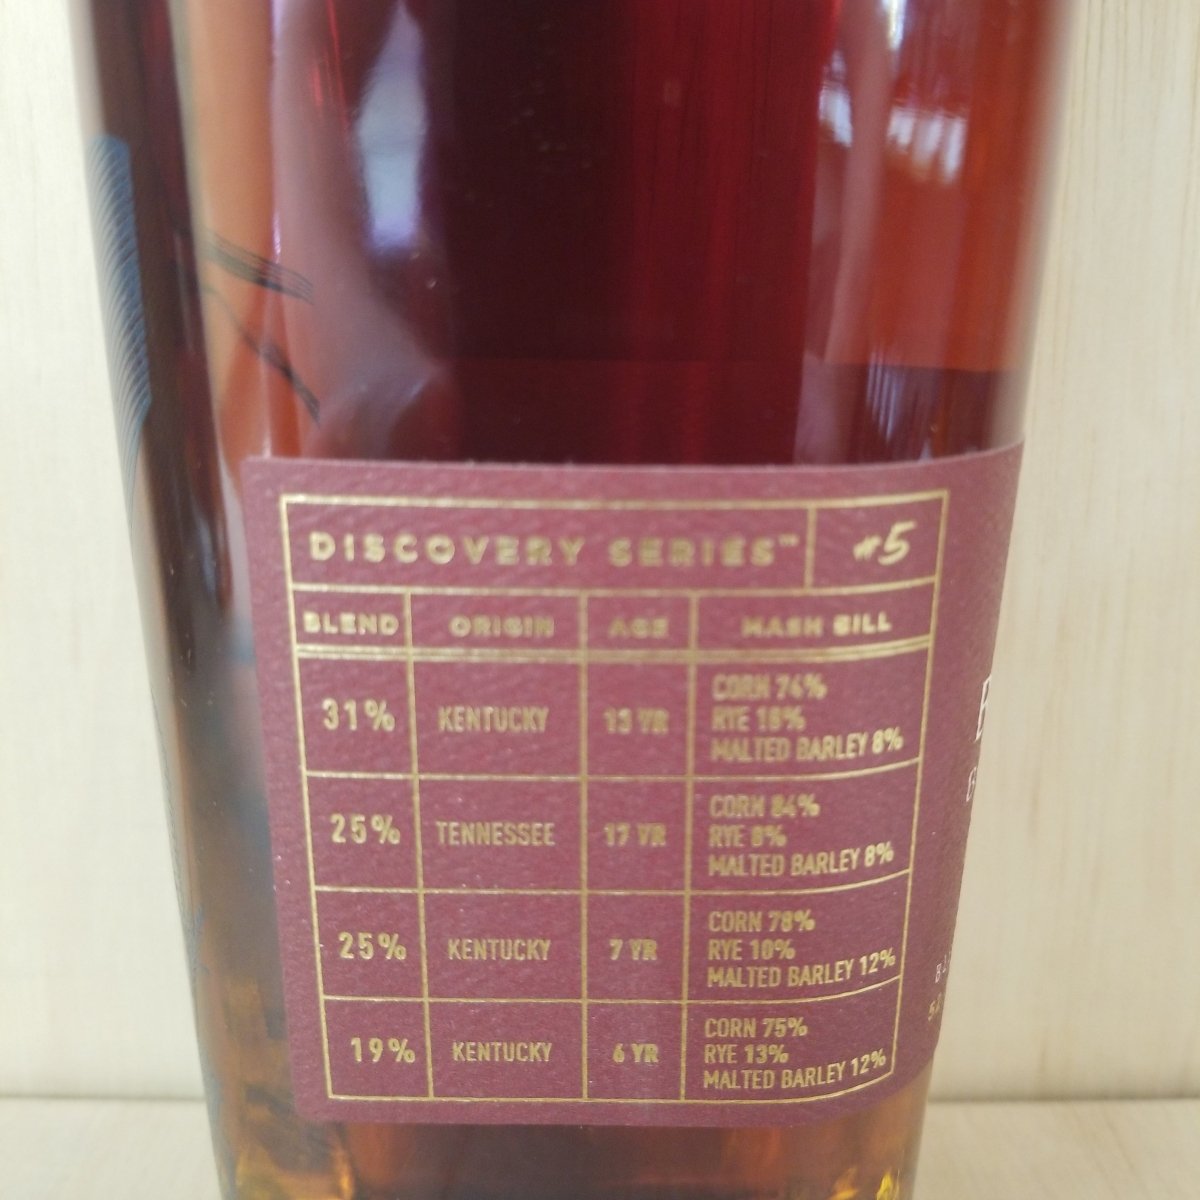 Bardstown Discovery Series #5 Bourbon 750ml - Sip &amp; Say